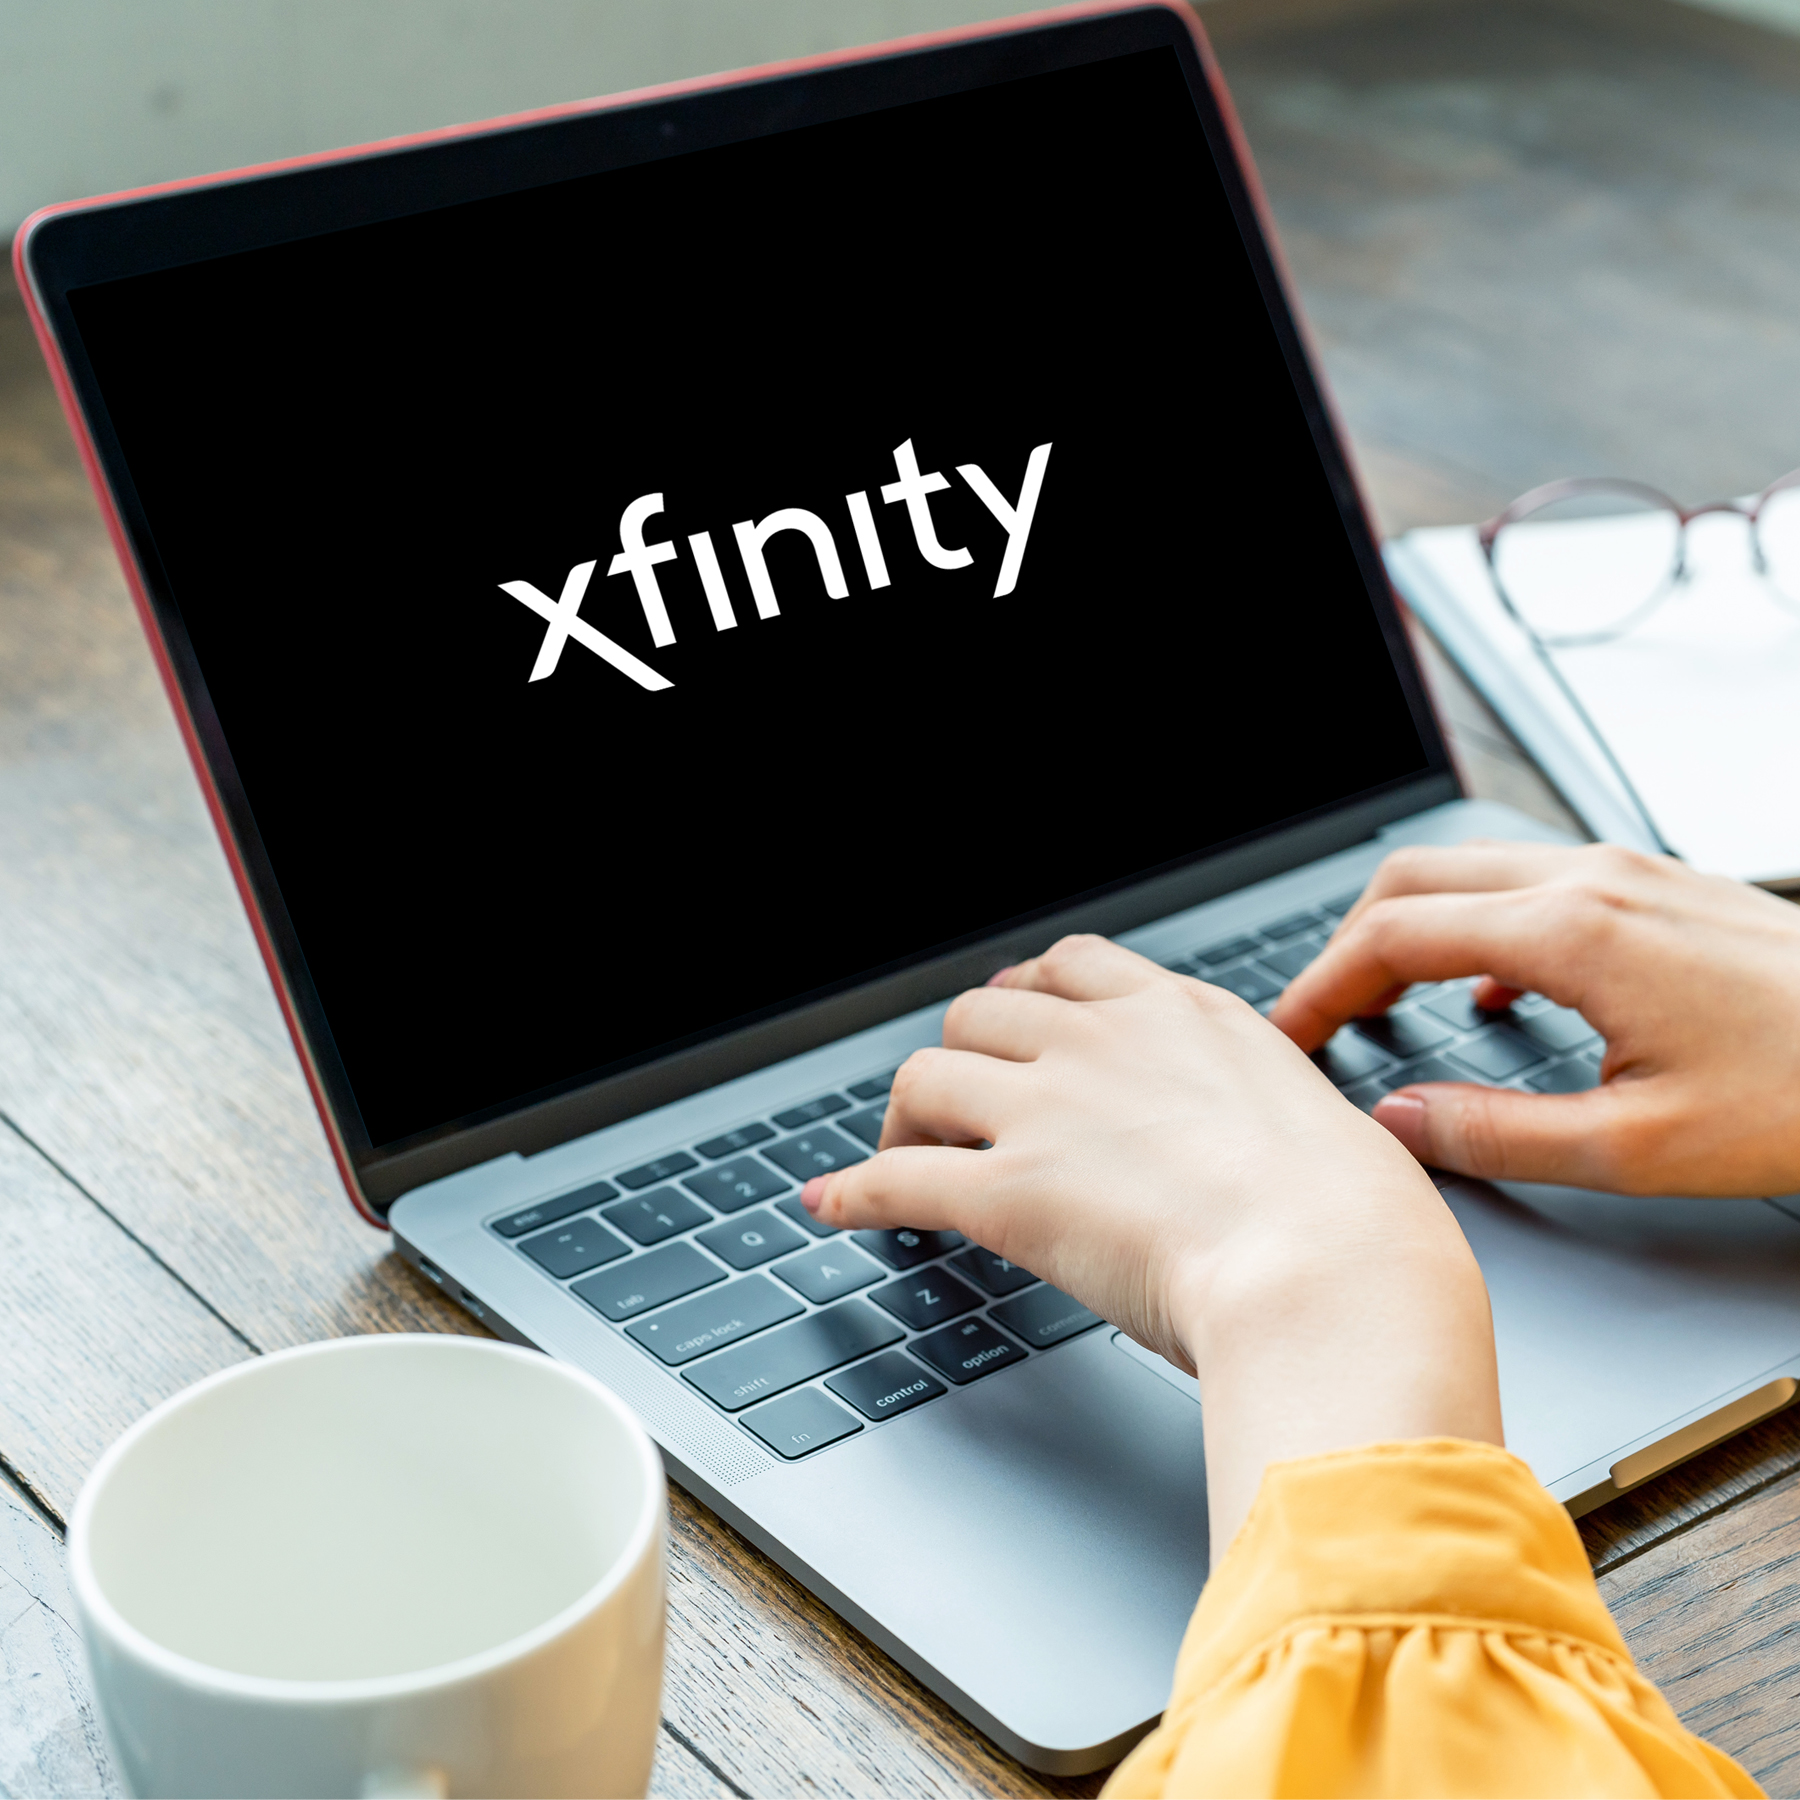 Xfinity Voted One of the Best Internet Providers & Cable Companies by Times Leader Readers